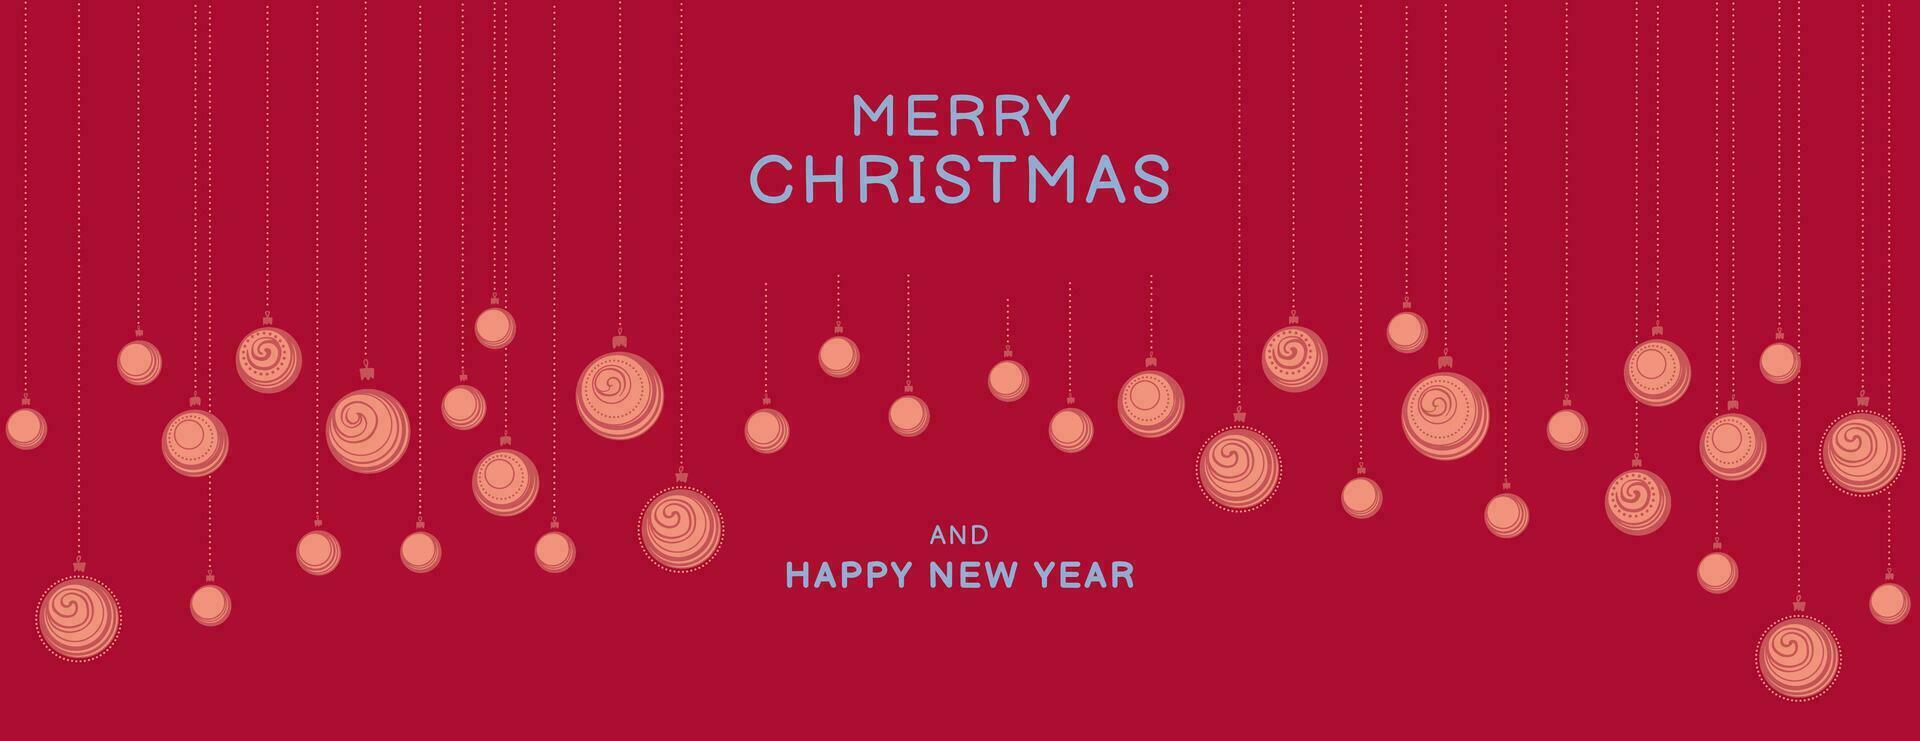 Merry Christmas and Happy New Year background. Vector hand drawn stylized Christmas balls. Horizontal red border with copy space.  Suitable for email header, post in social networks, advertising